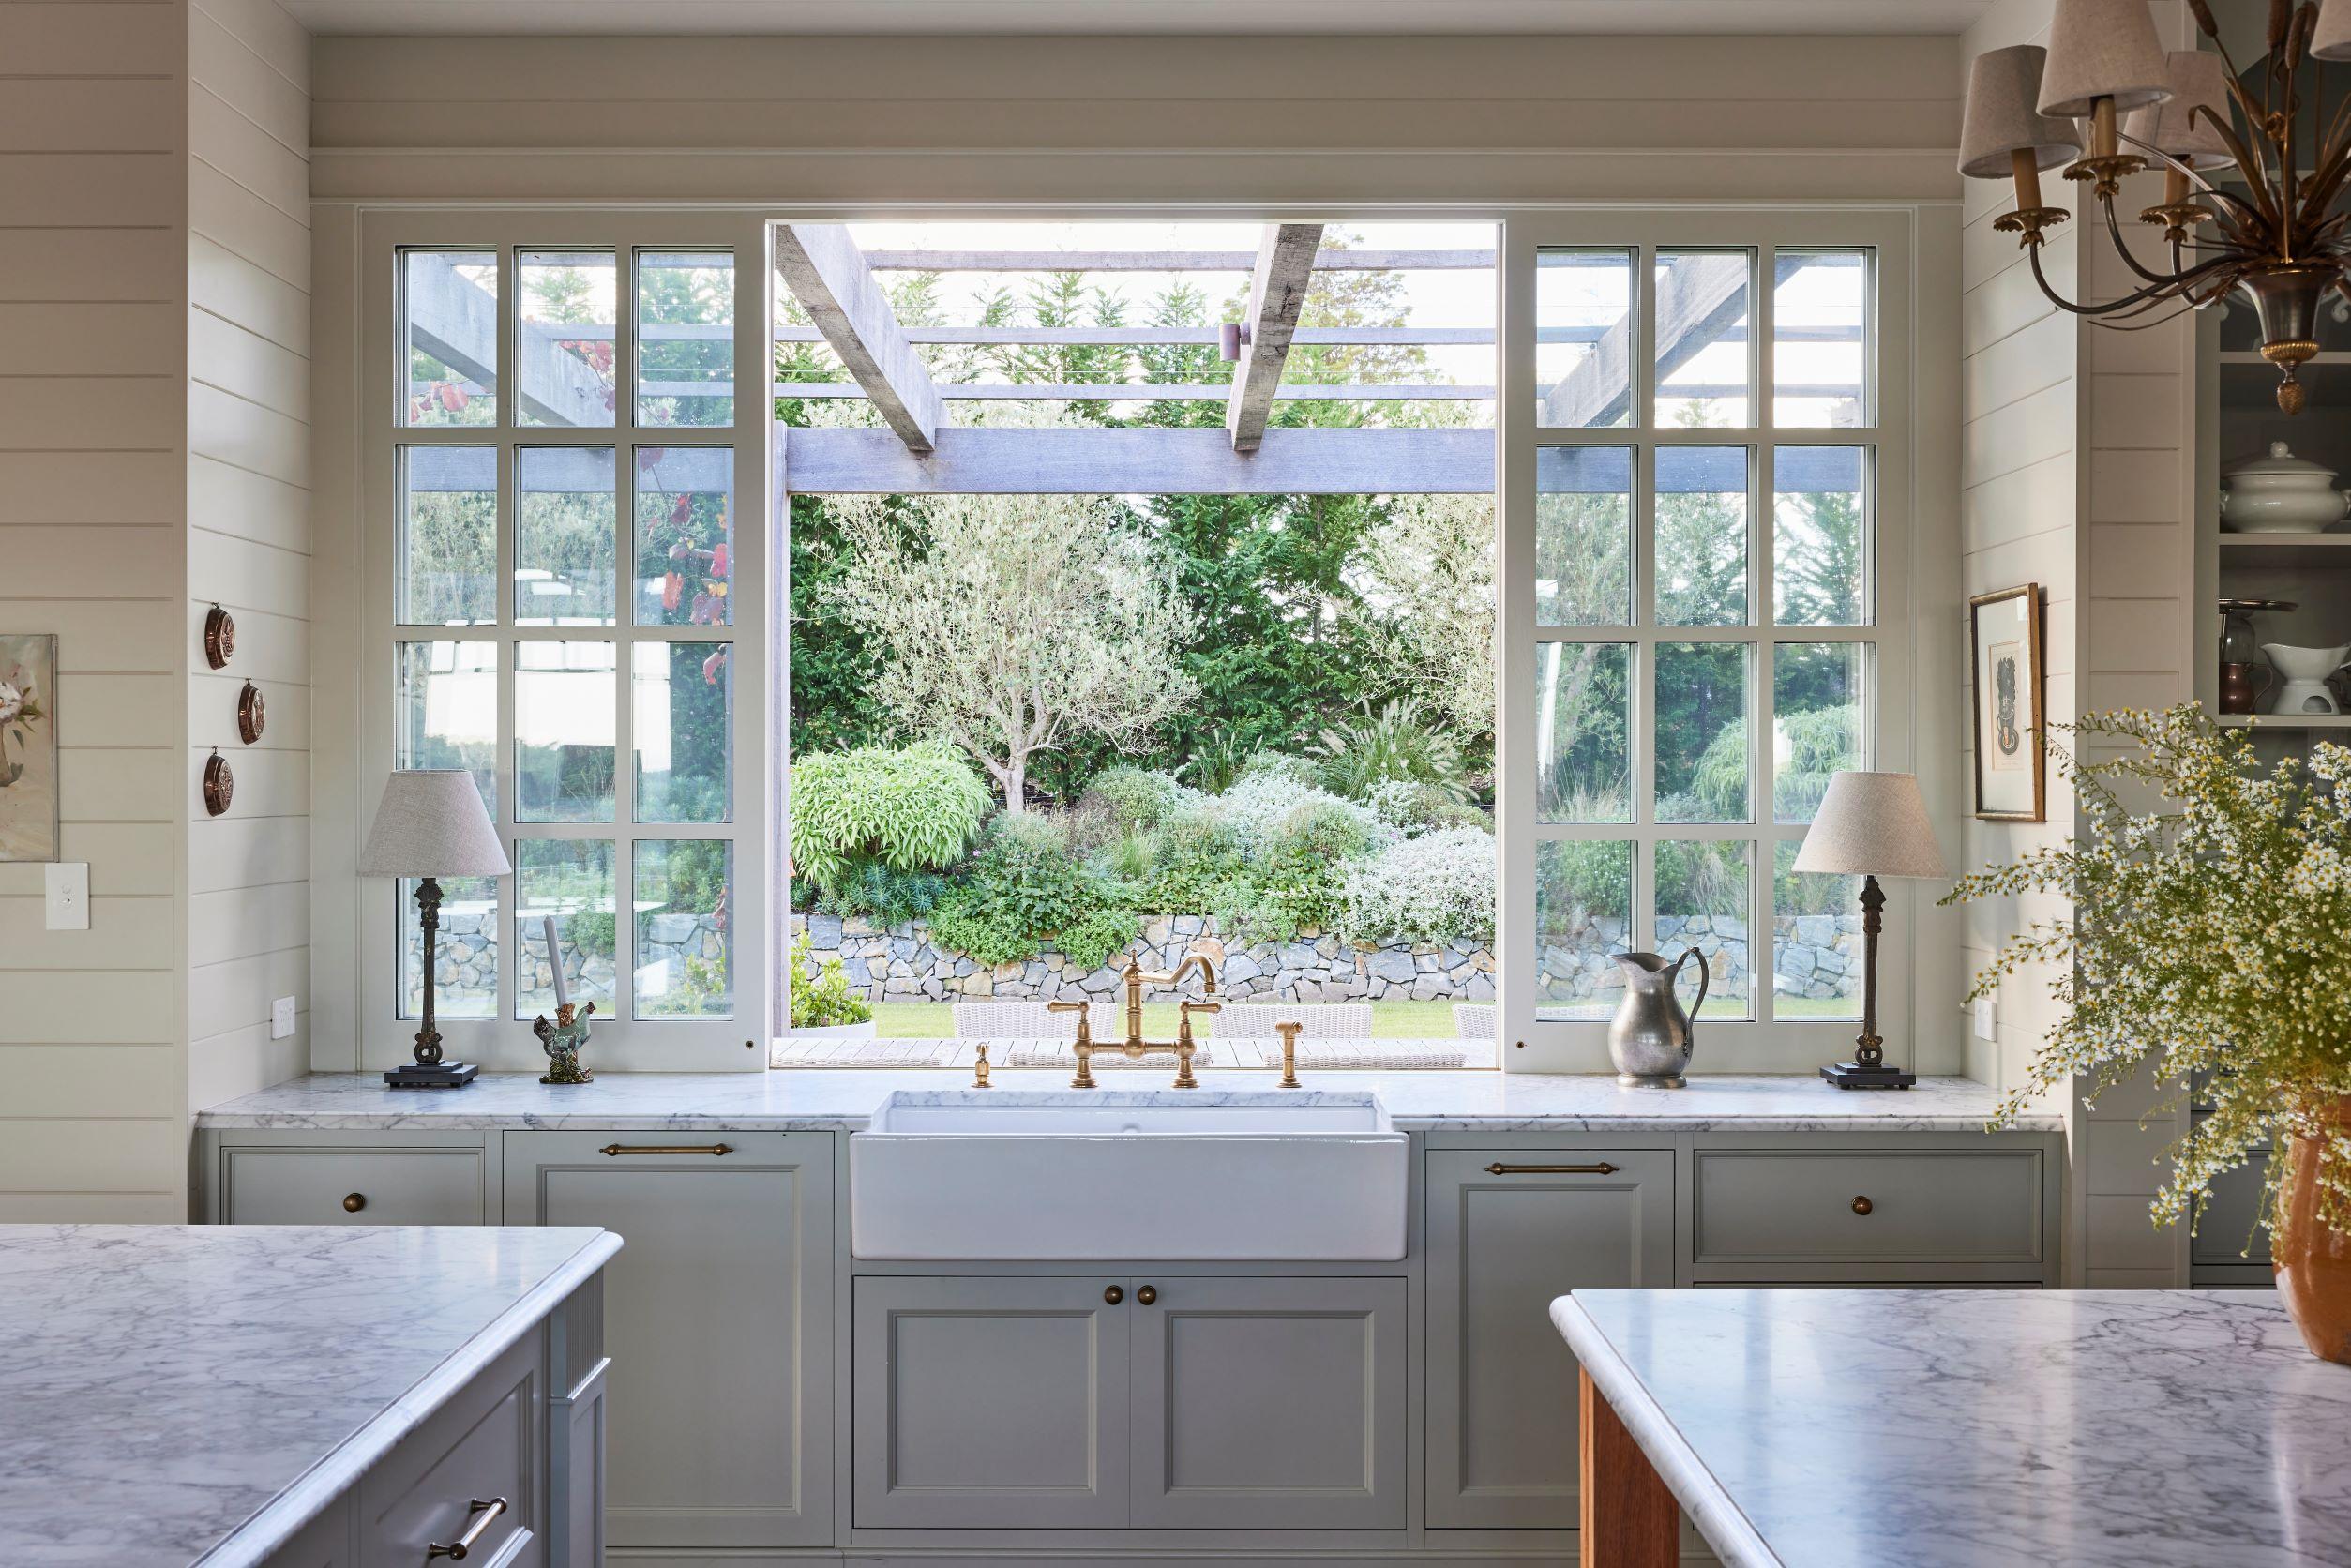 Farmhouse kitchen with window looking out onto garden